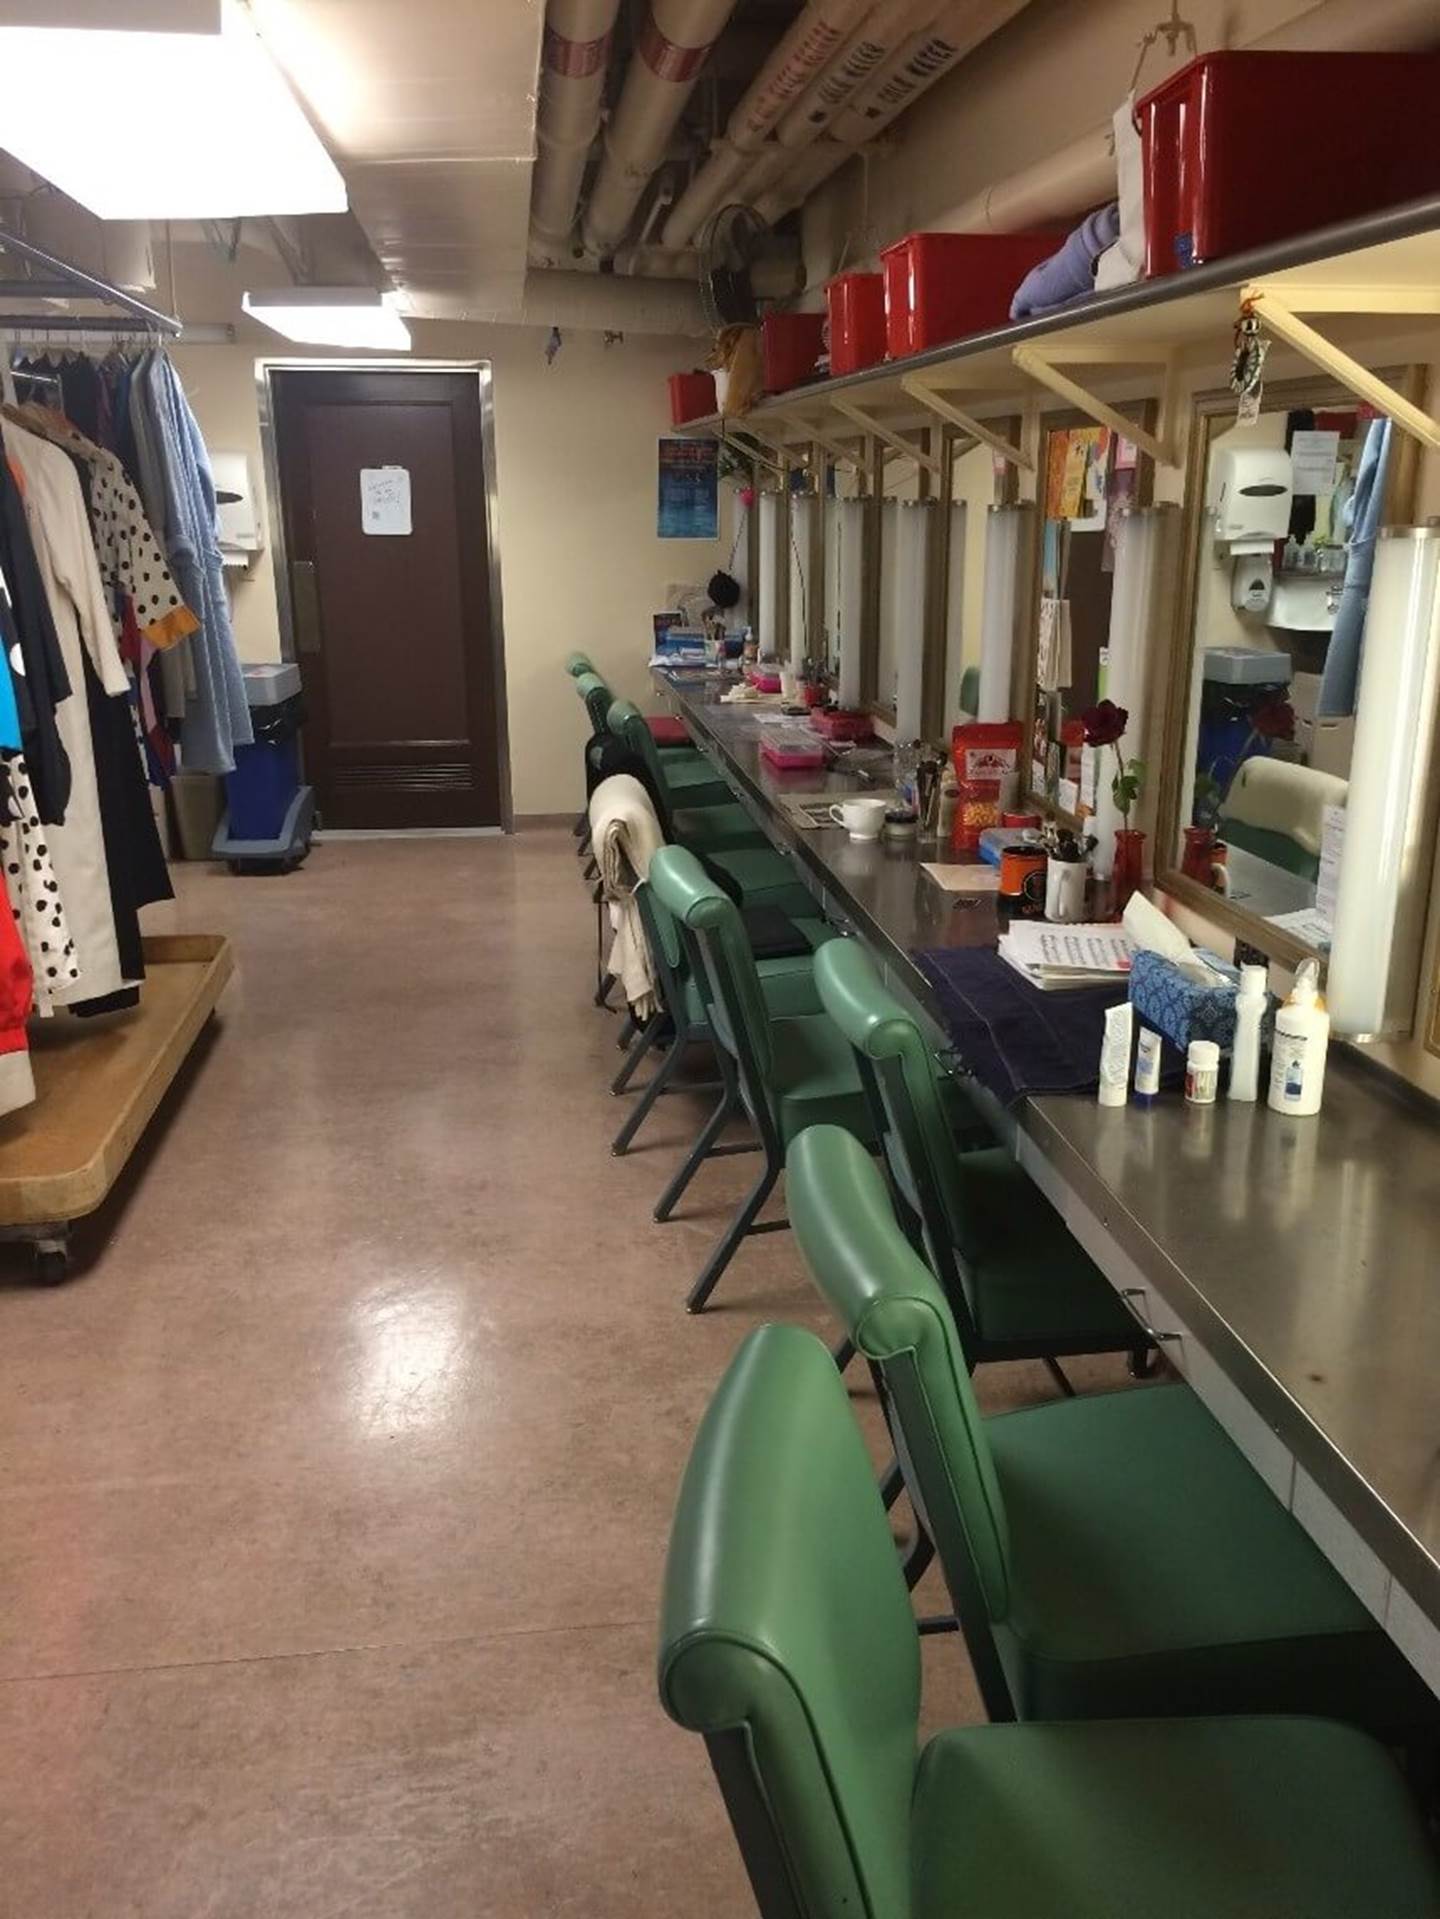 One of the women’s chorus dressing rooms in the basement of the War Memorial.